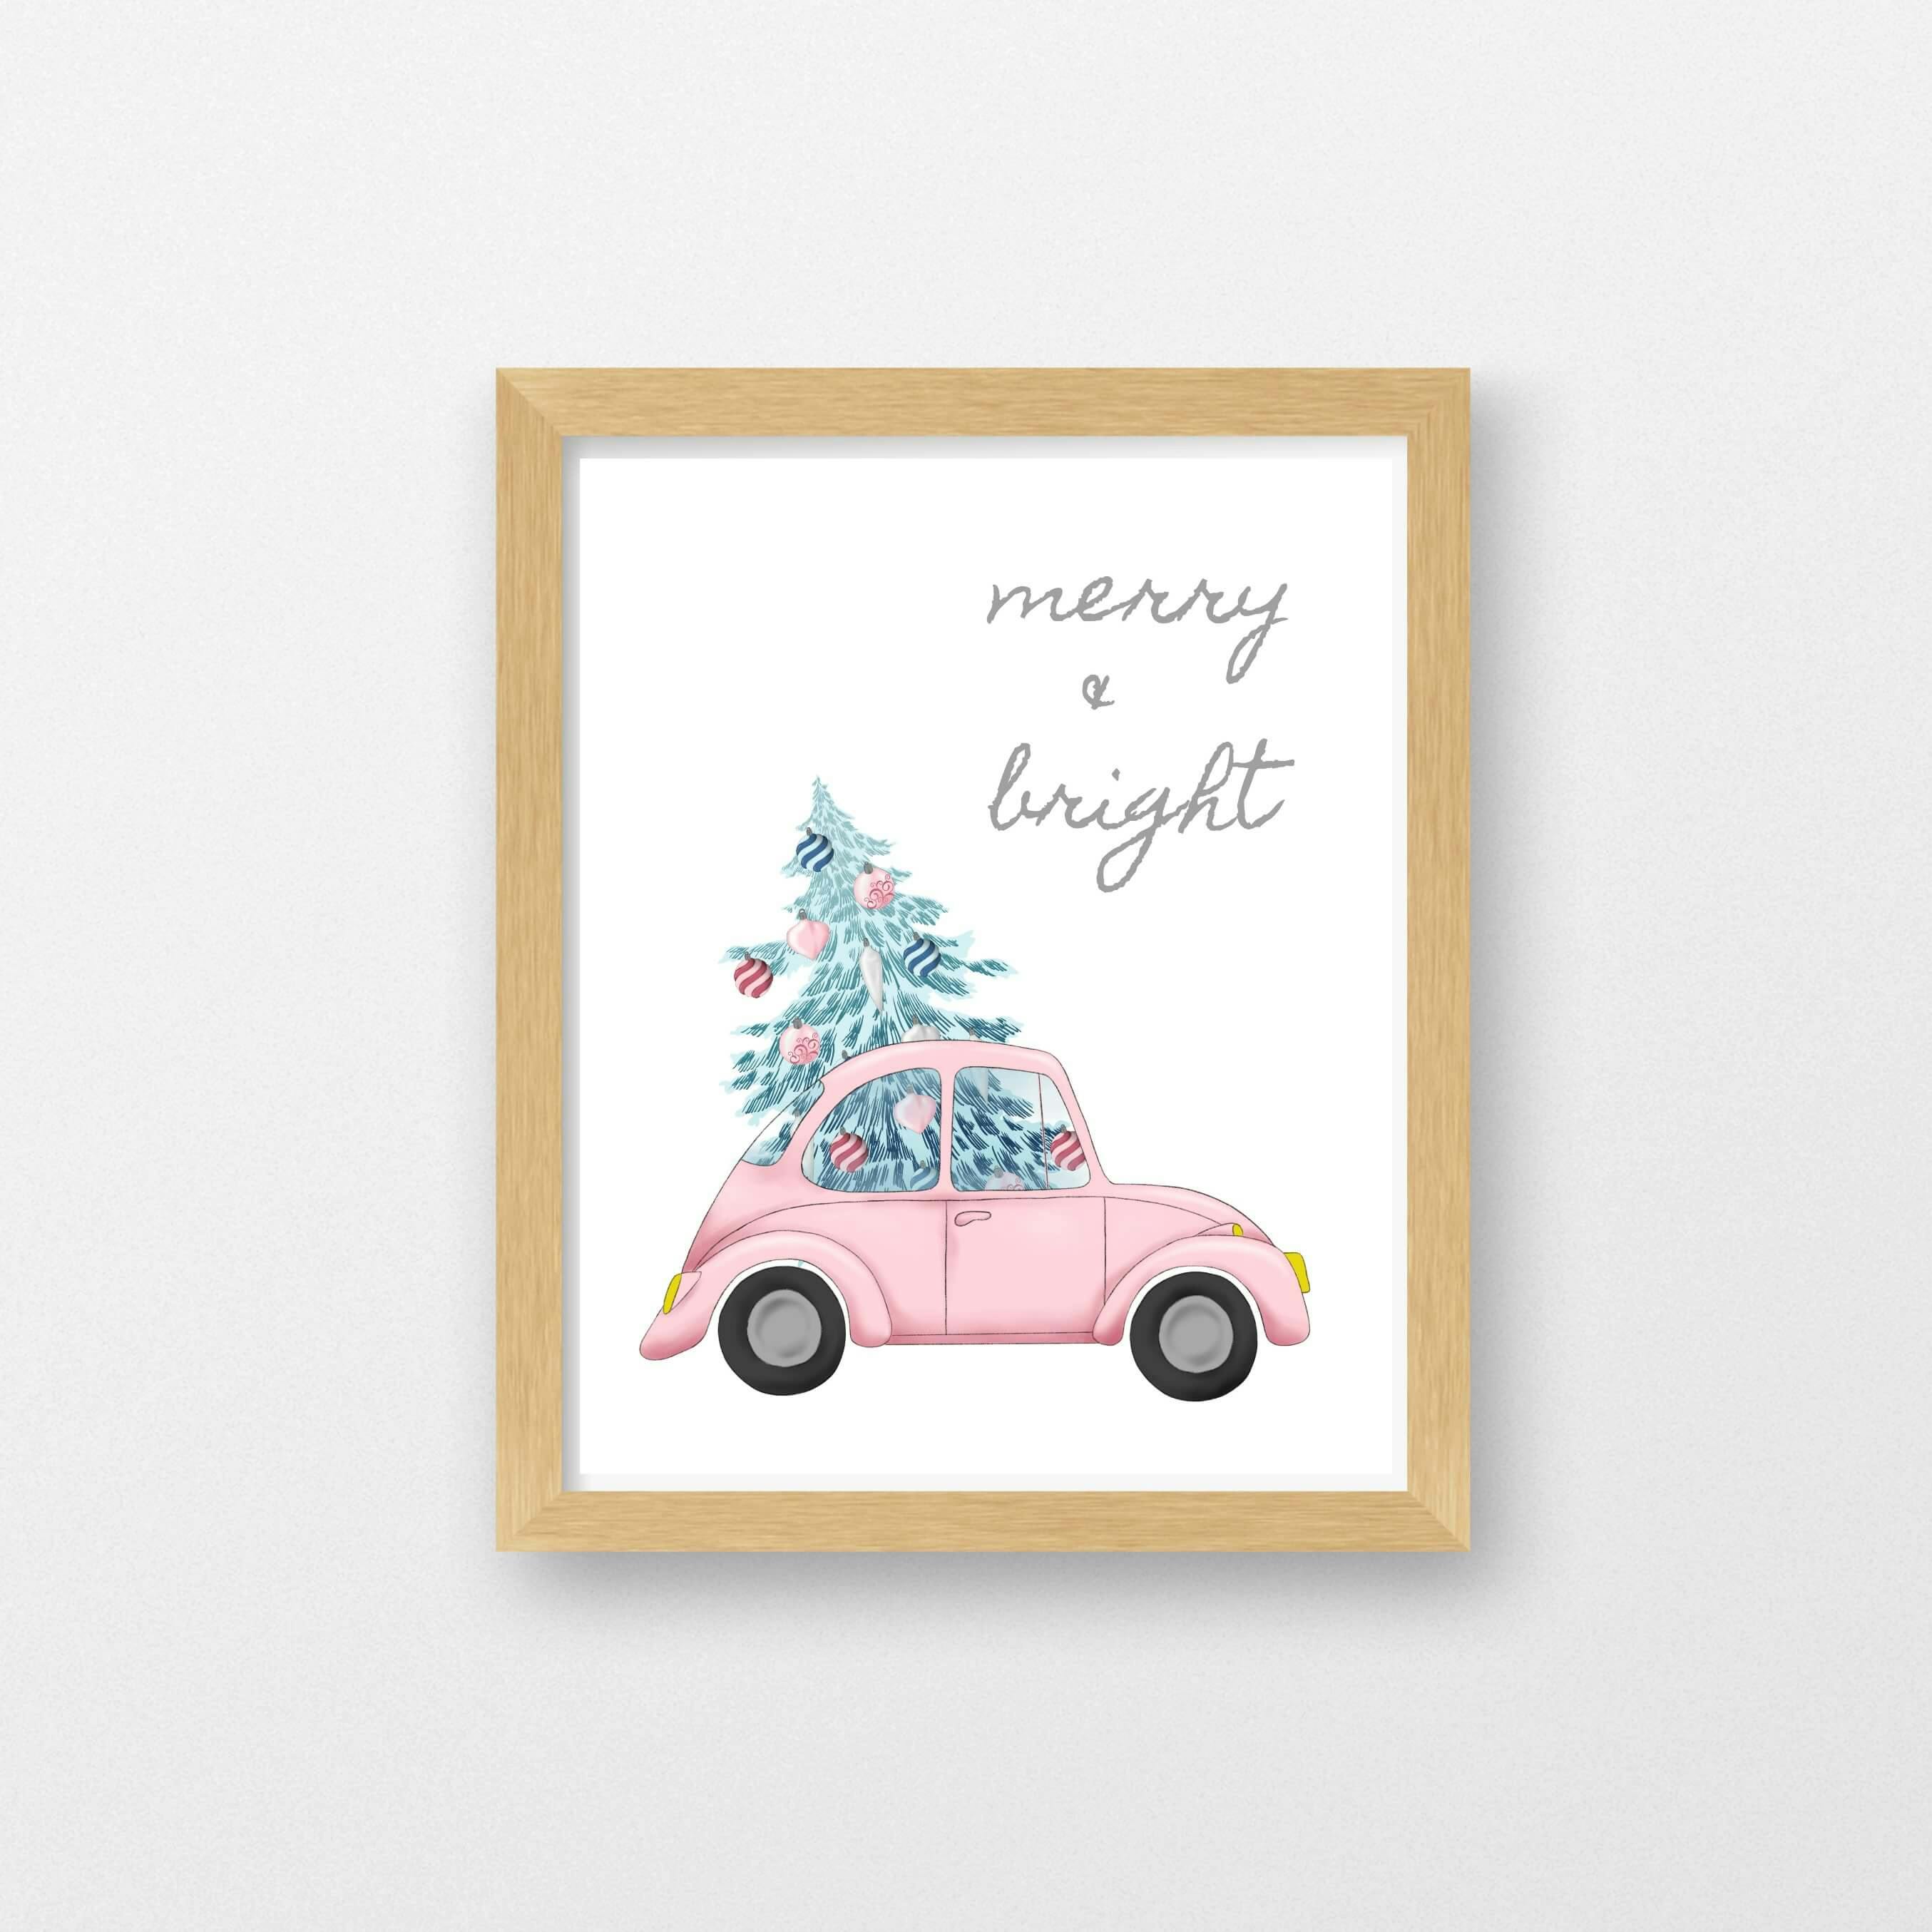 Retro Christmas Prints - Christmas Clearance - Digital Download - undefined - bright side girl shoppe